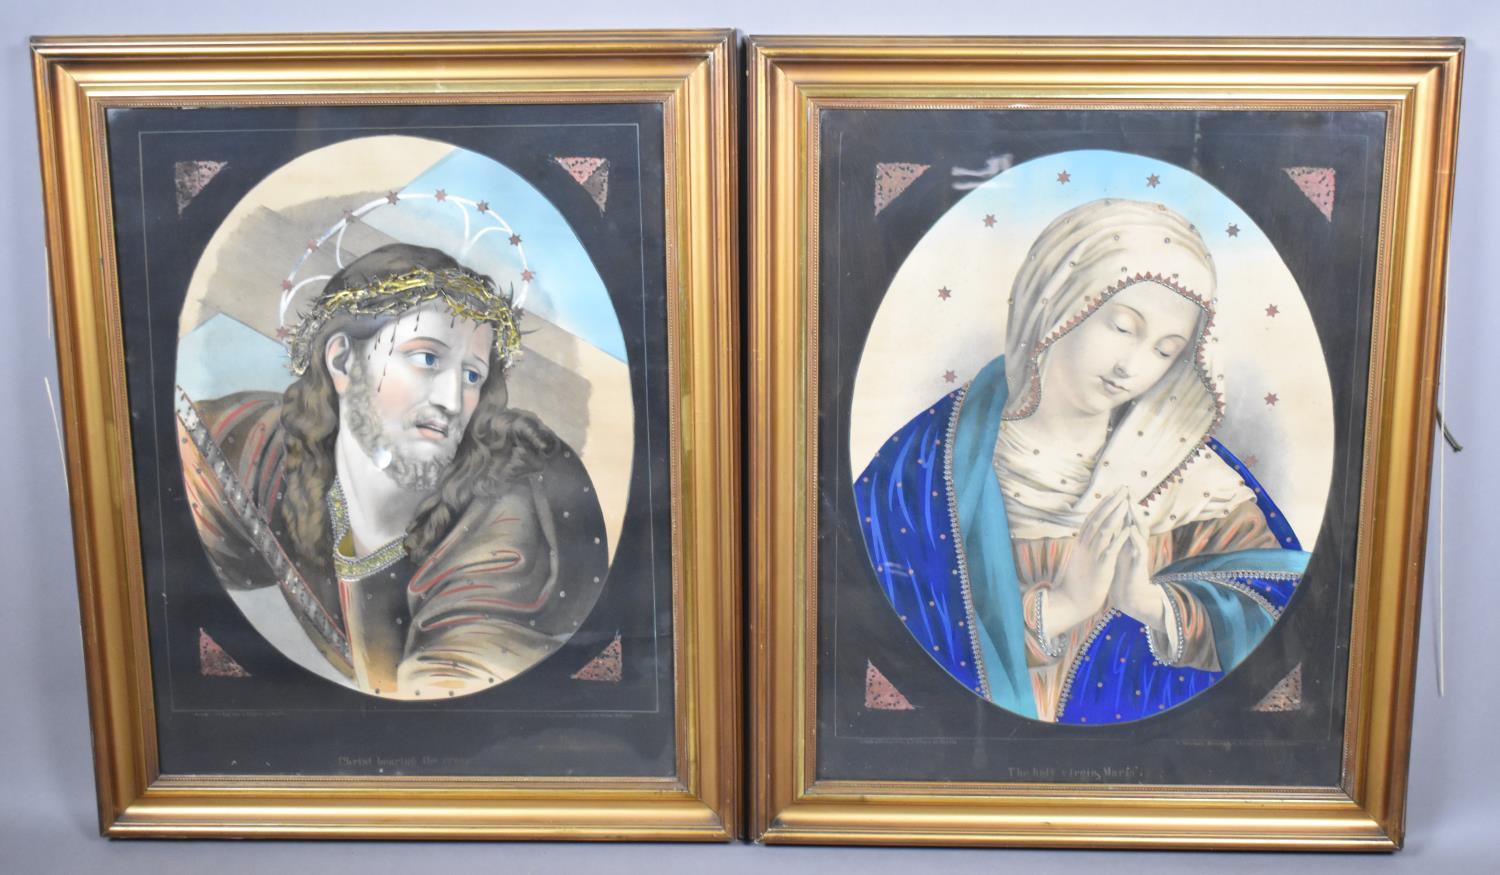 A Pair of Large Late Victorian Gilt Framed Coloured Prints, Jesus and Mary, 69x84cm Overall